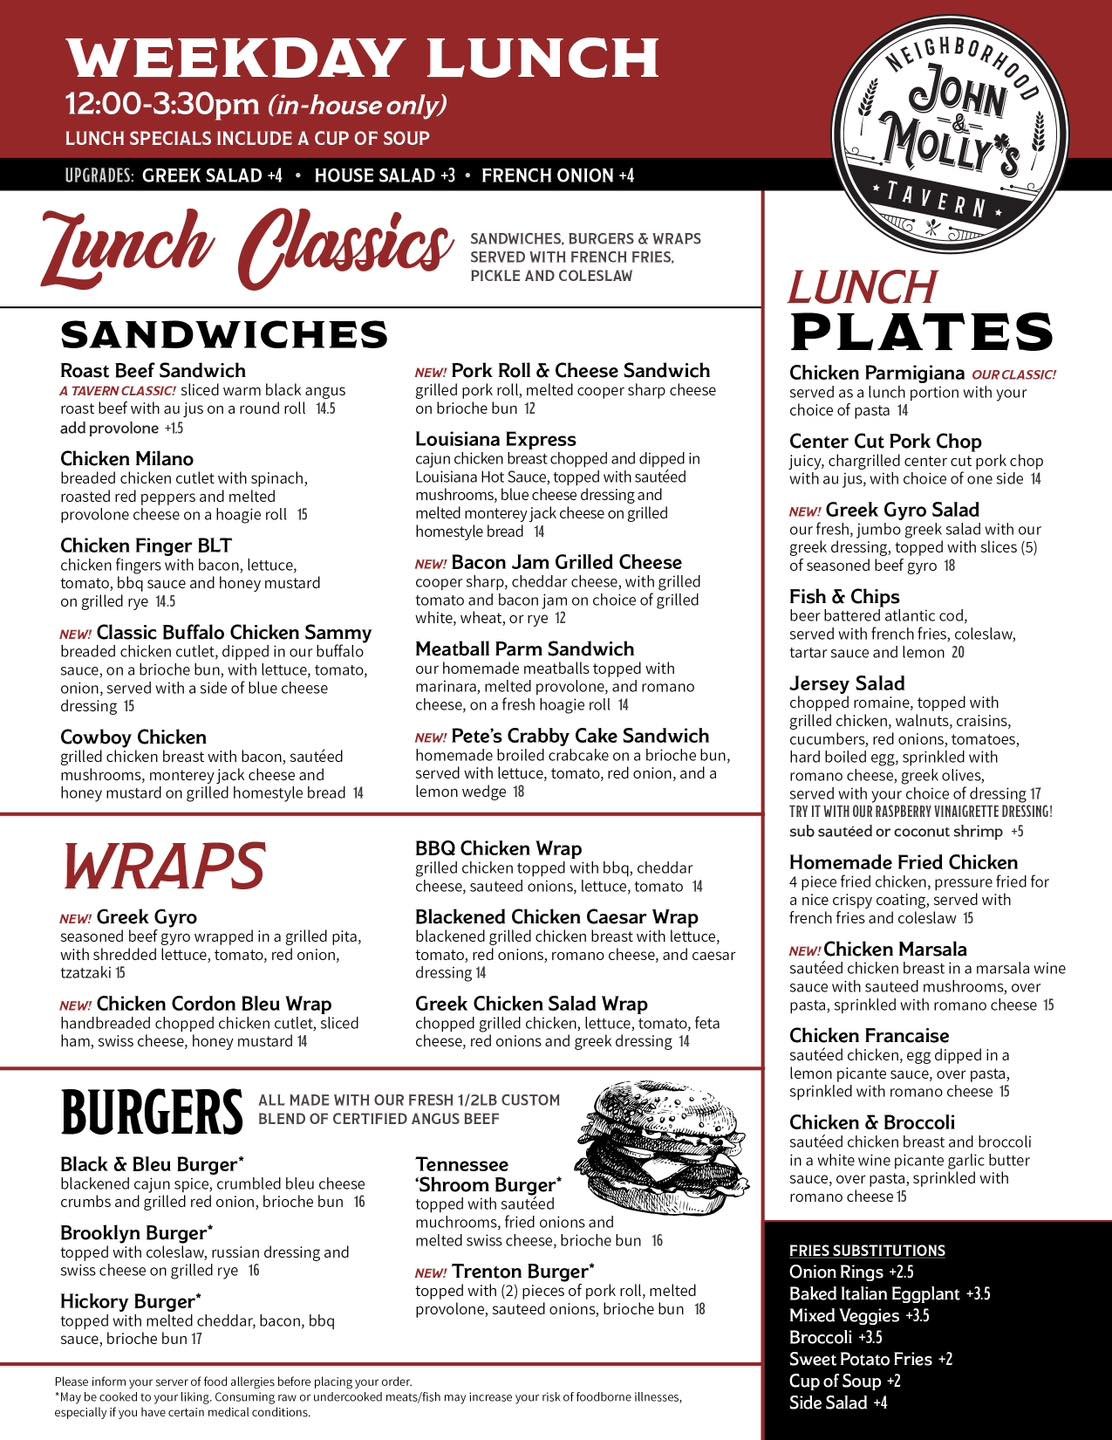 🍔 Our New Weekday Lunch Specials Begin this Tuesday! 🥗 

🥣 Come served with a cup of our homemade soup! 🥣 

Available Tuesdays through Fridays 12pm-3pm, not available for takeout.

#lunchtime #salads #burgers #wraps #chickenparm